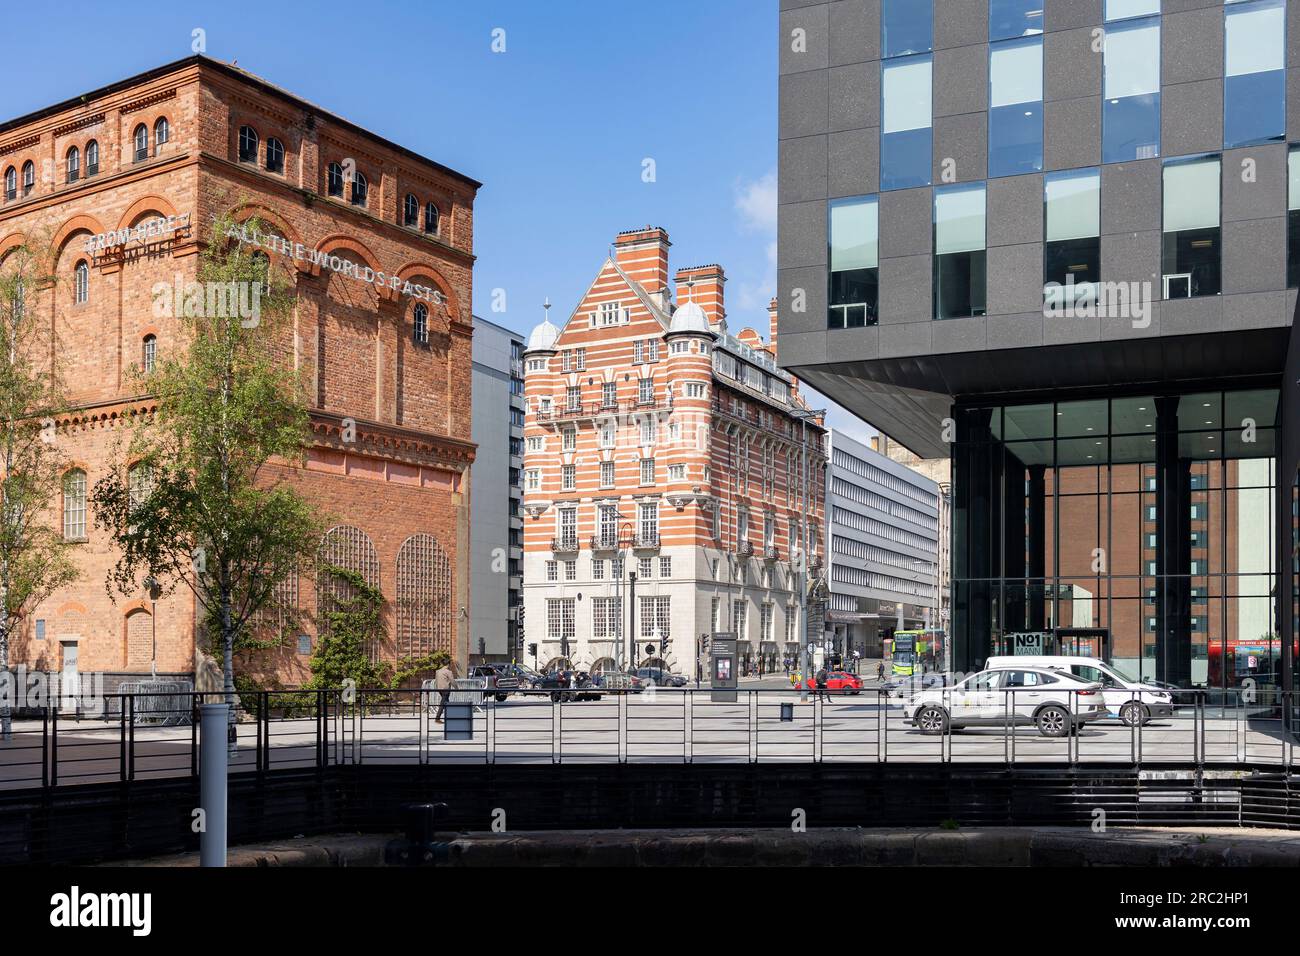 Liverpool, united kingdom May, 16, 2023 The former red brick Mersey Rail pumping station amid buildings on mann island, Liverpool. Stock Photo